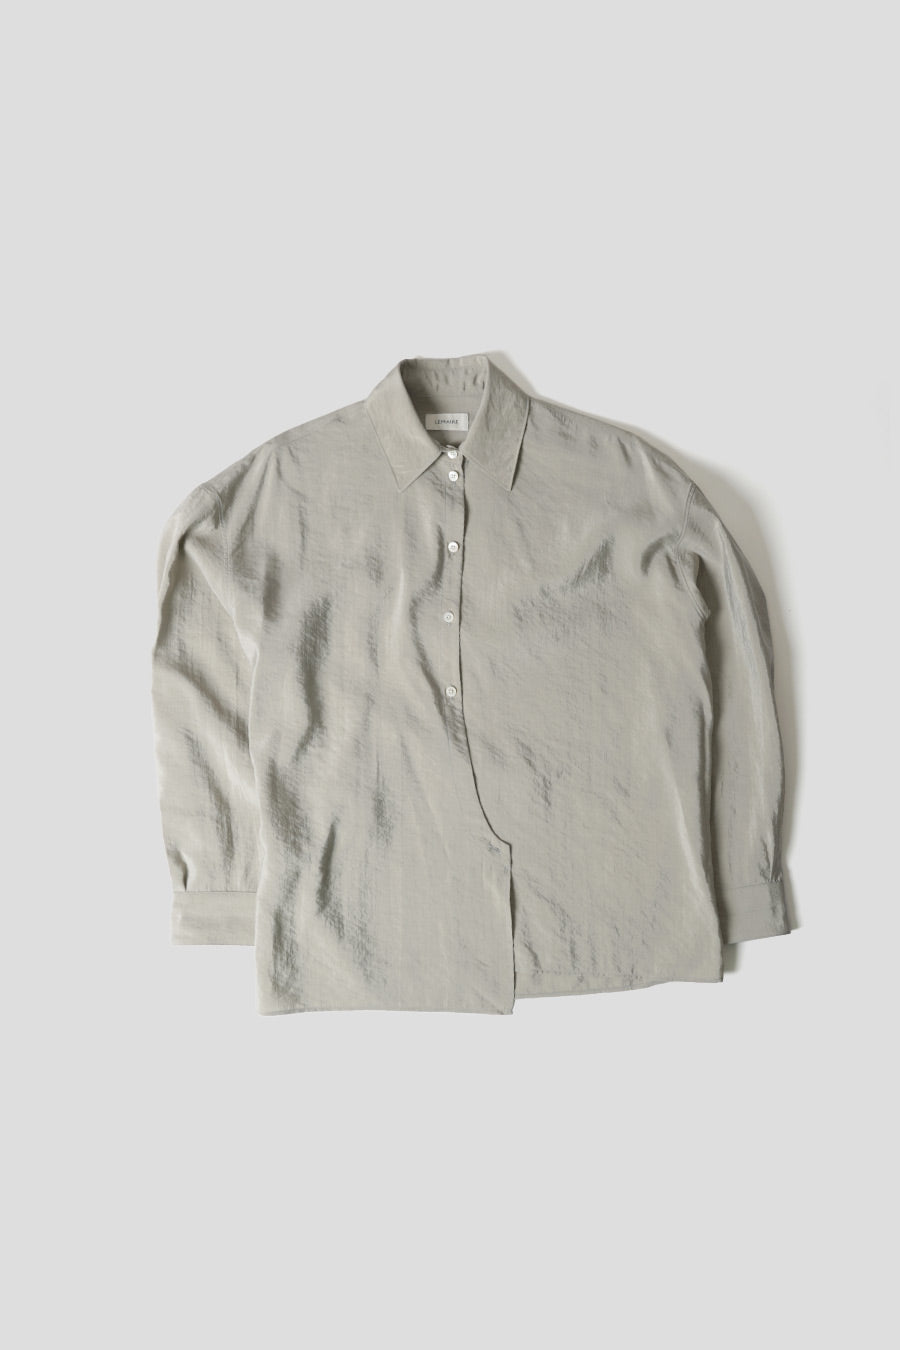 LEMAIRE - CHEMISE TWISTED GRISE - LE LABO STORE